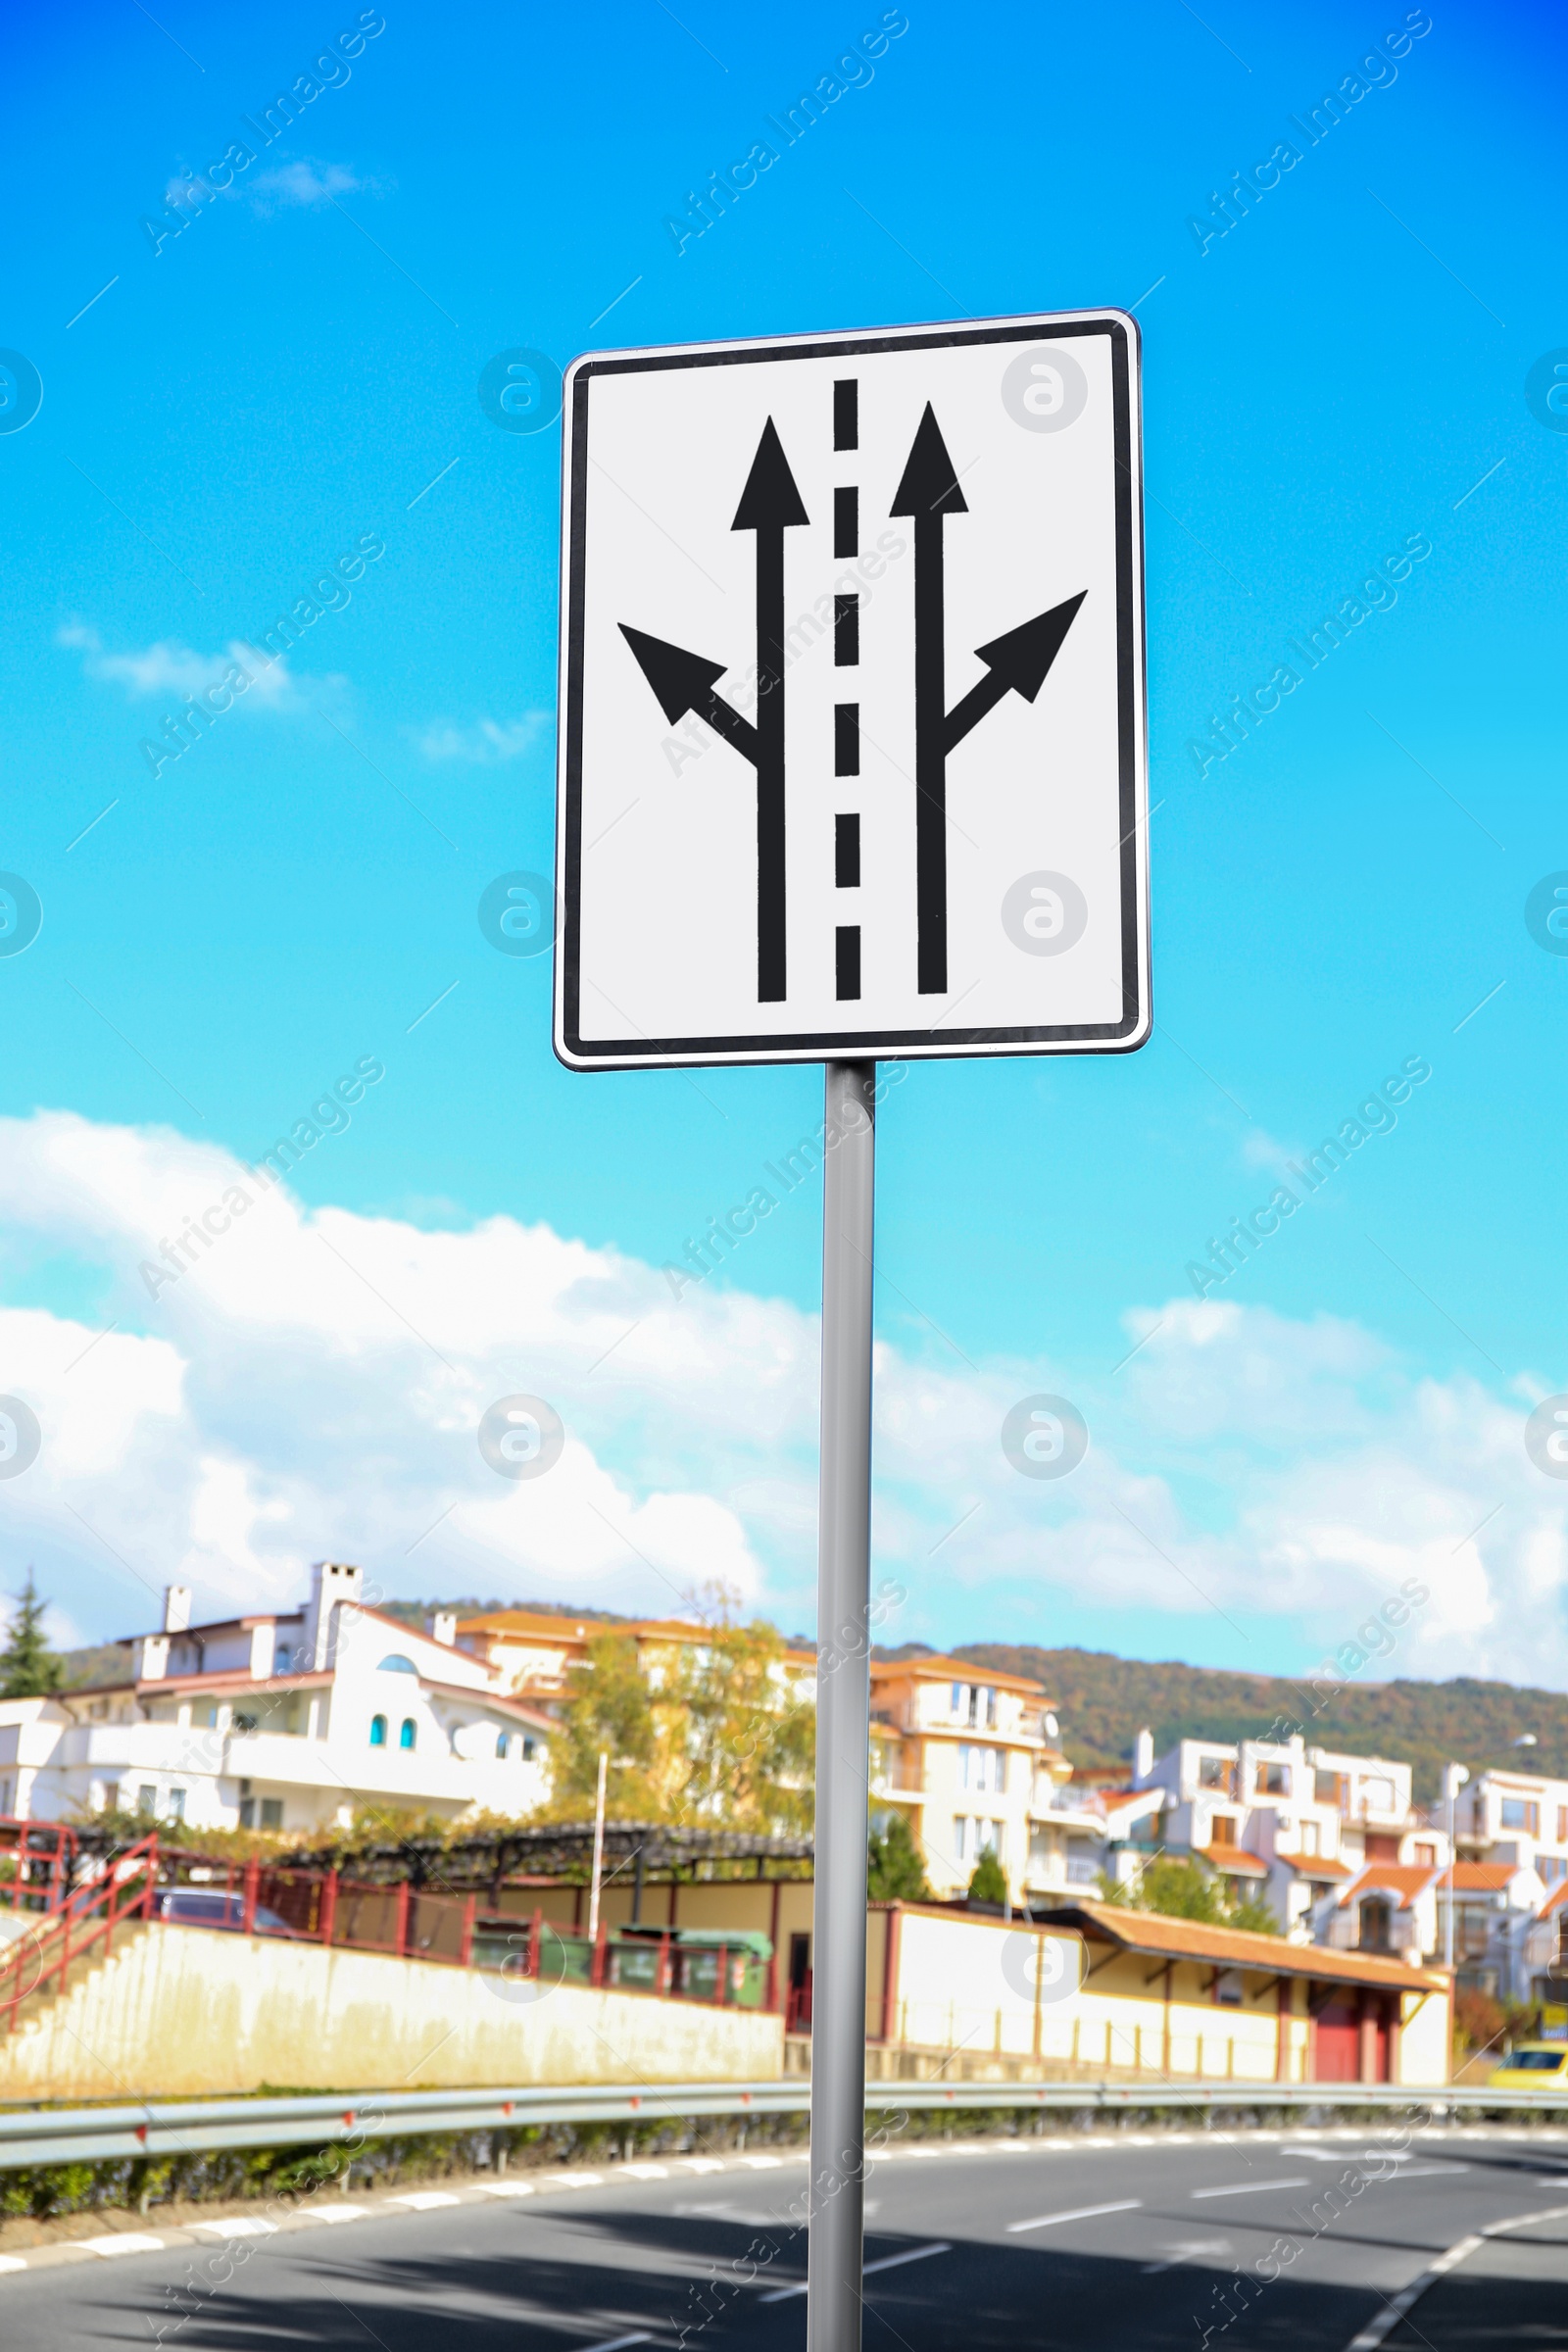 Photo of Post with road sign against cloudy sky in city